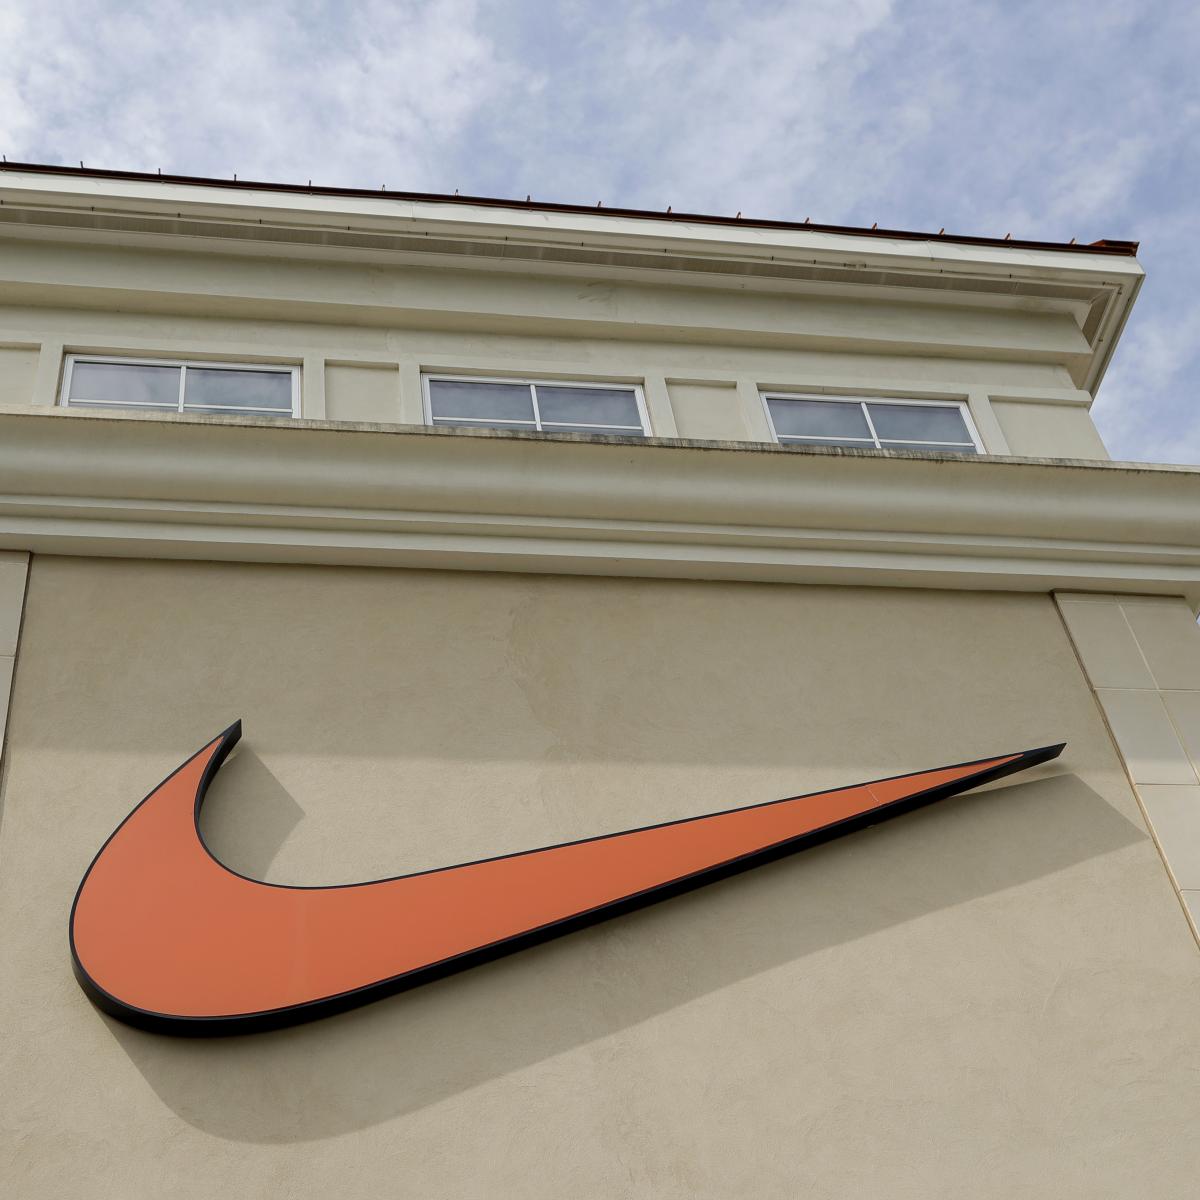 Nike Closing Stores in USA Until March 27 Amid Coronavirus, Workers